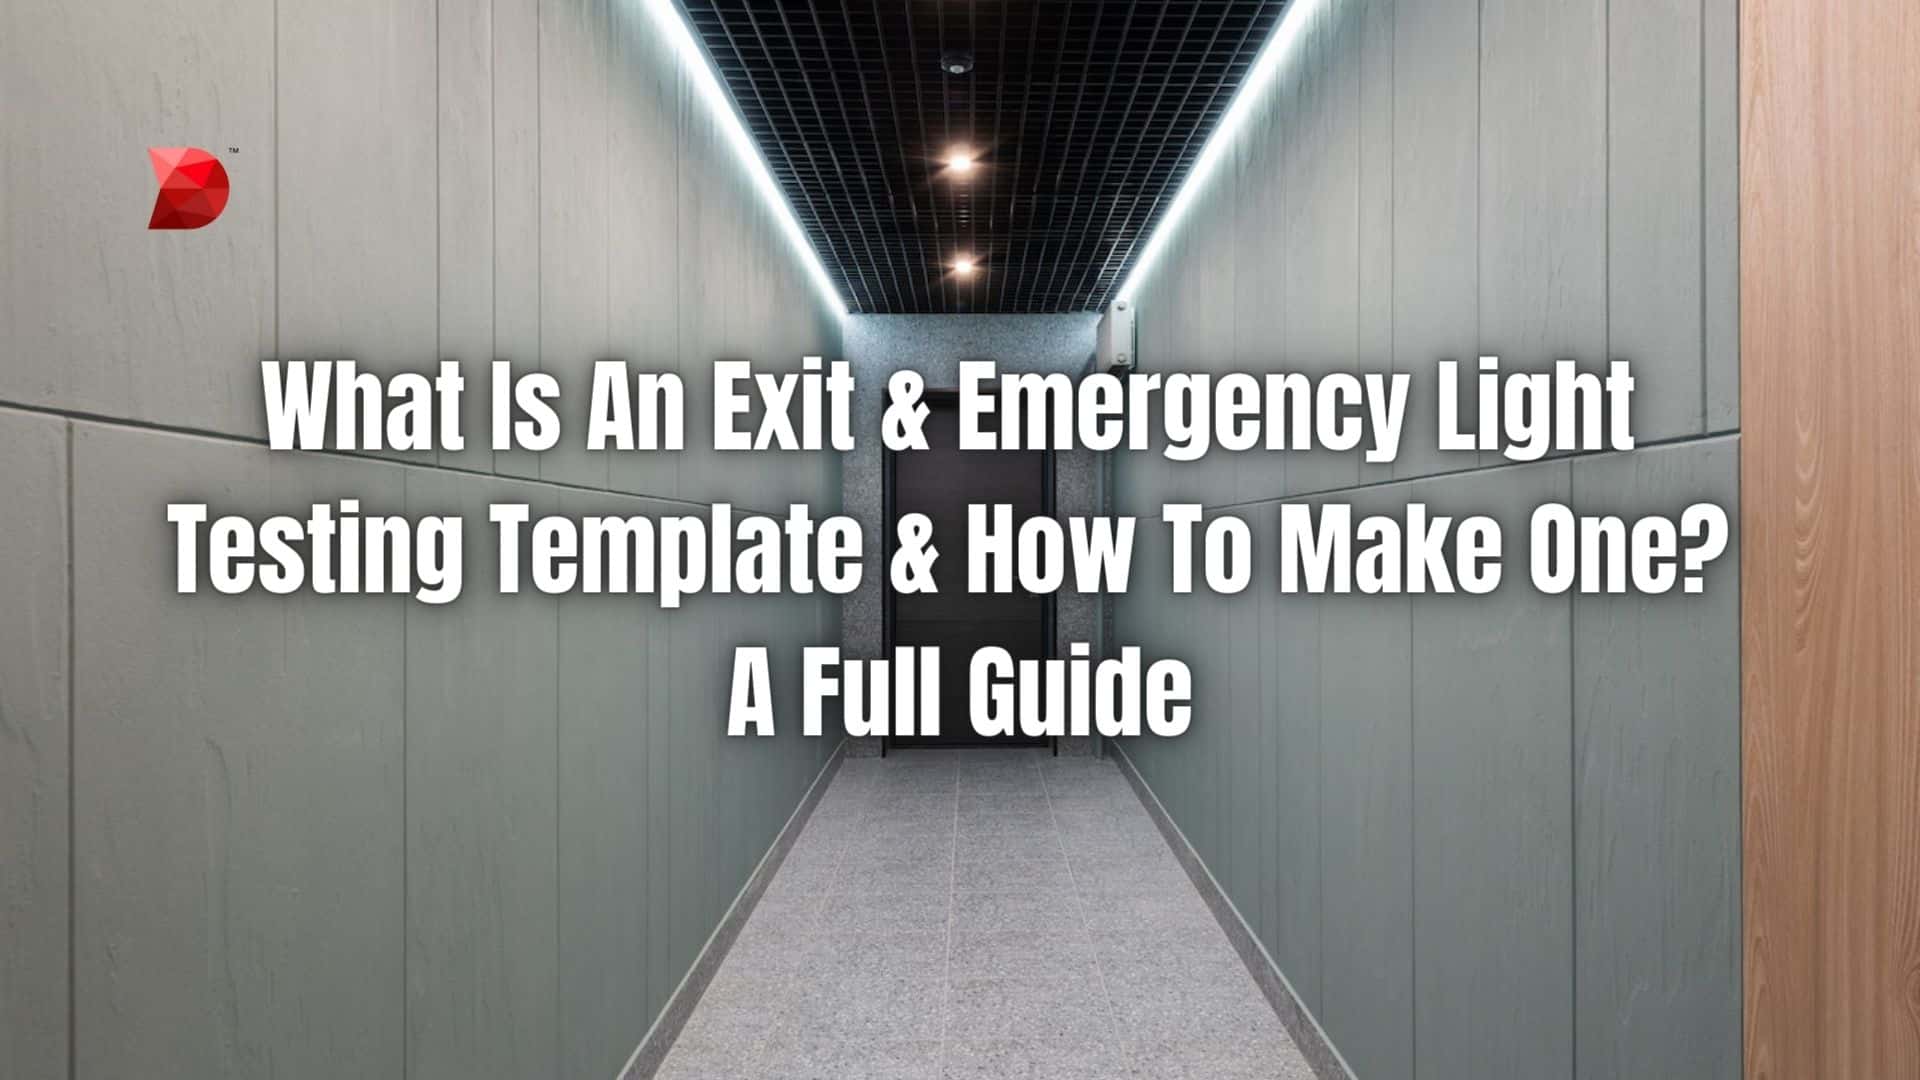 What Is An Exit & Emergency Light Testing Template & How To Make One A Full Guide